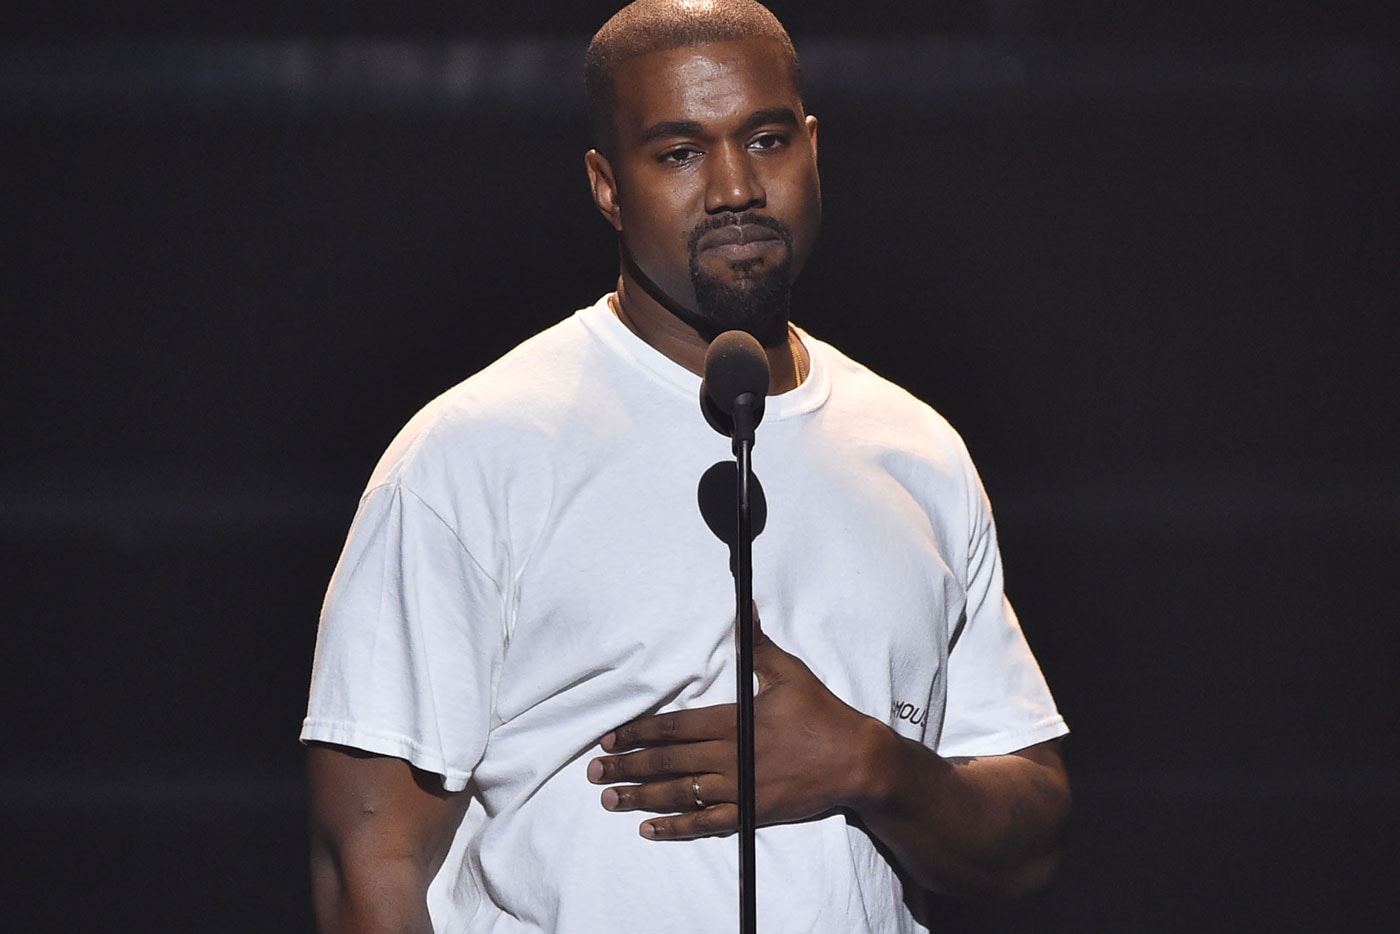 IKEA Turns Down Offer to Work With Kanye West